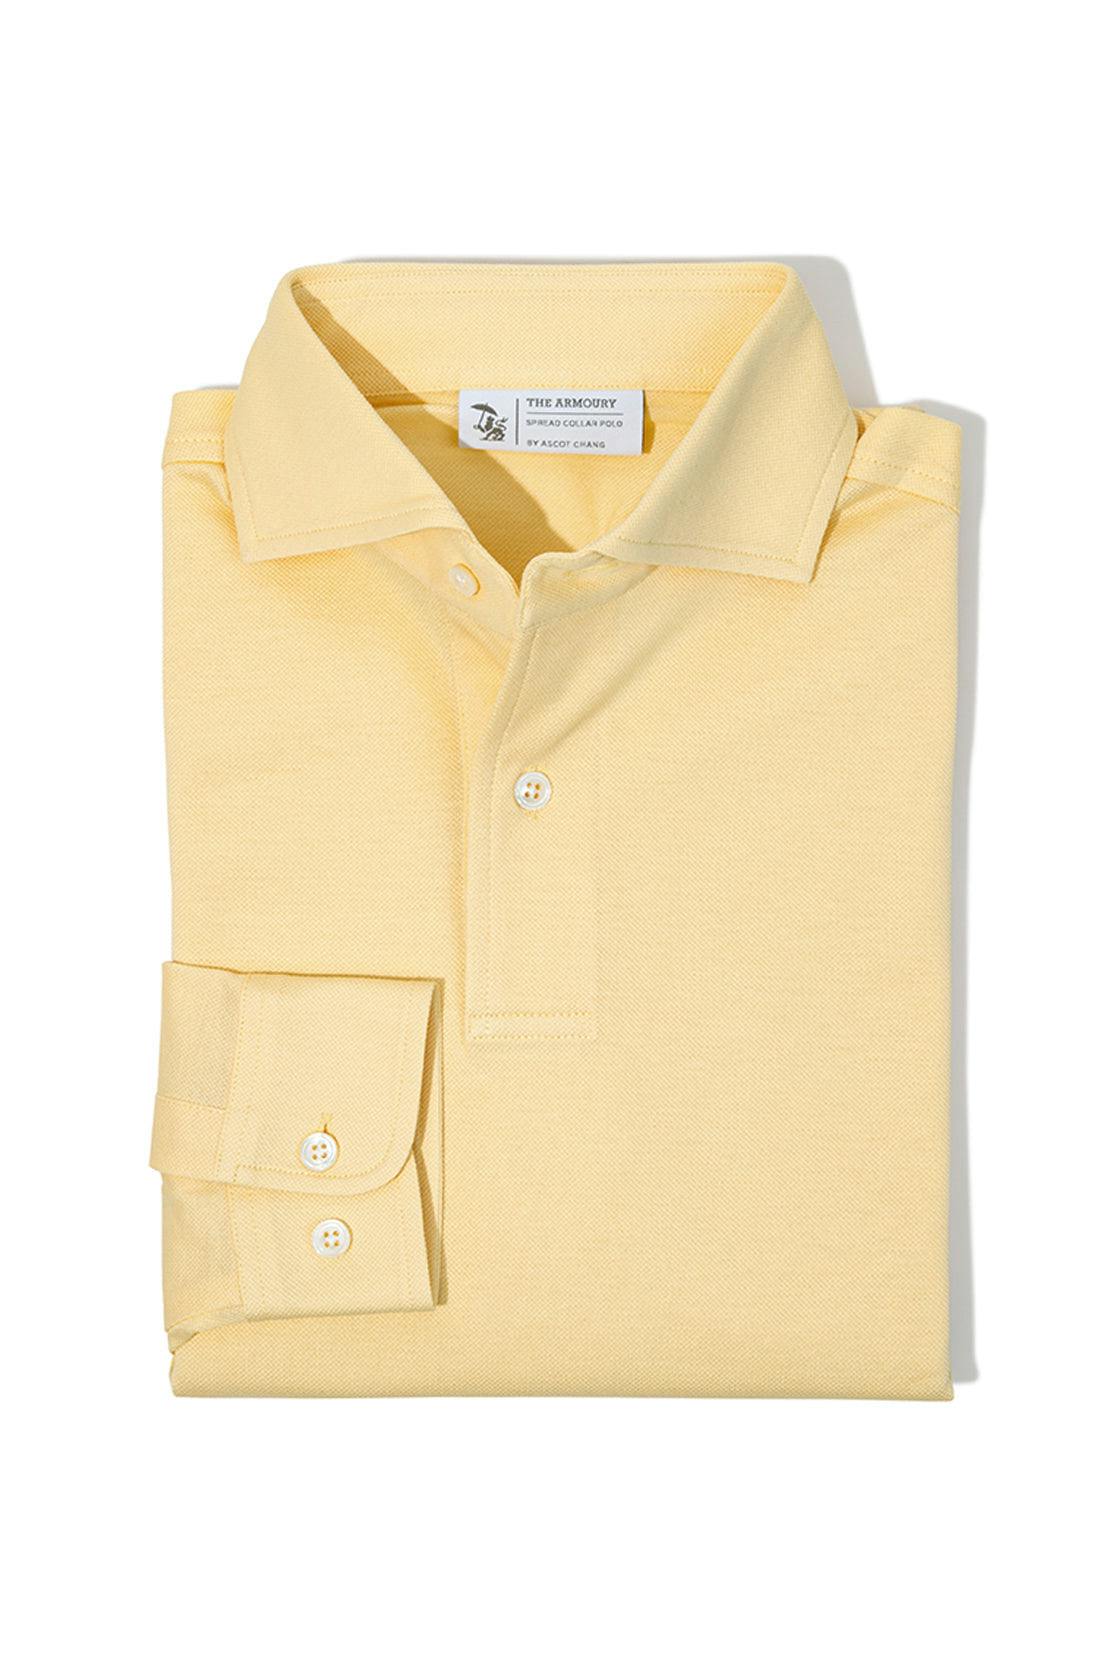 The Armoury by Ascot Chang Yellow Cotton Long Sleeve Spread Collar Polo